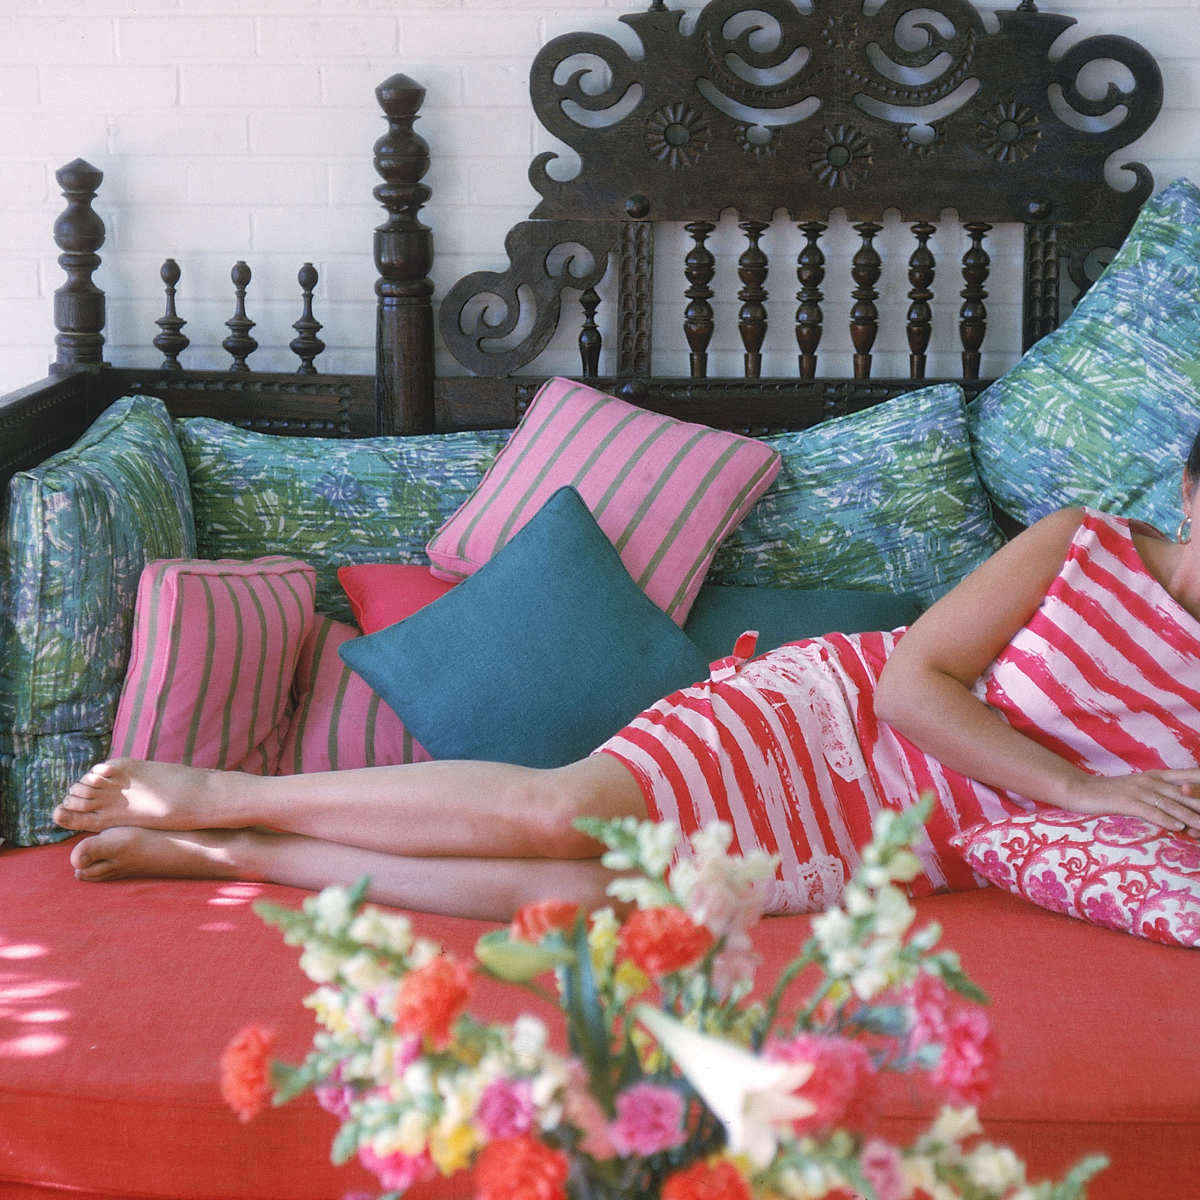 Lilly Pulitzer: My Life in Lilly